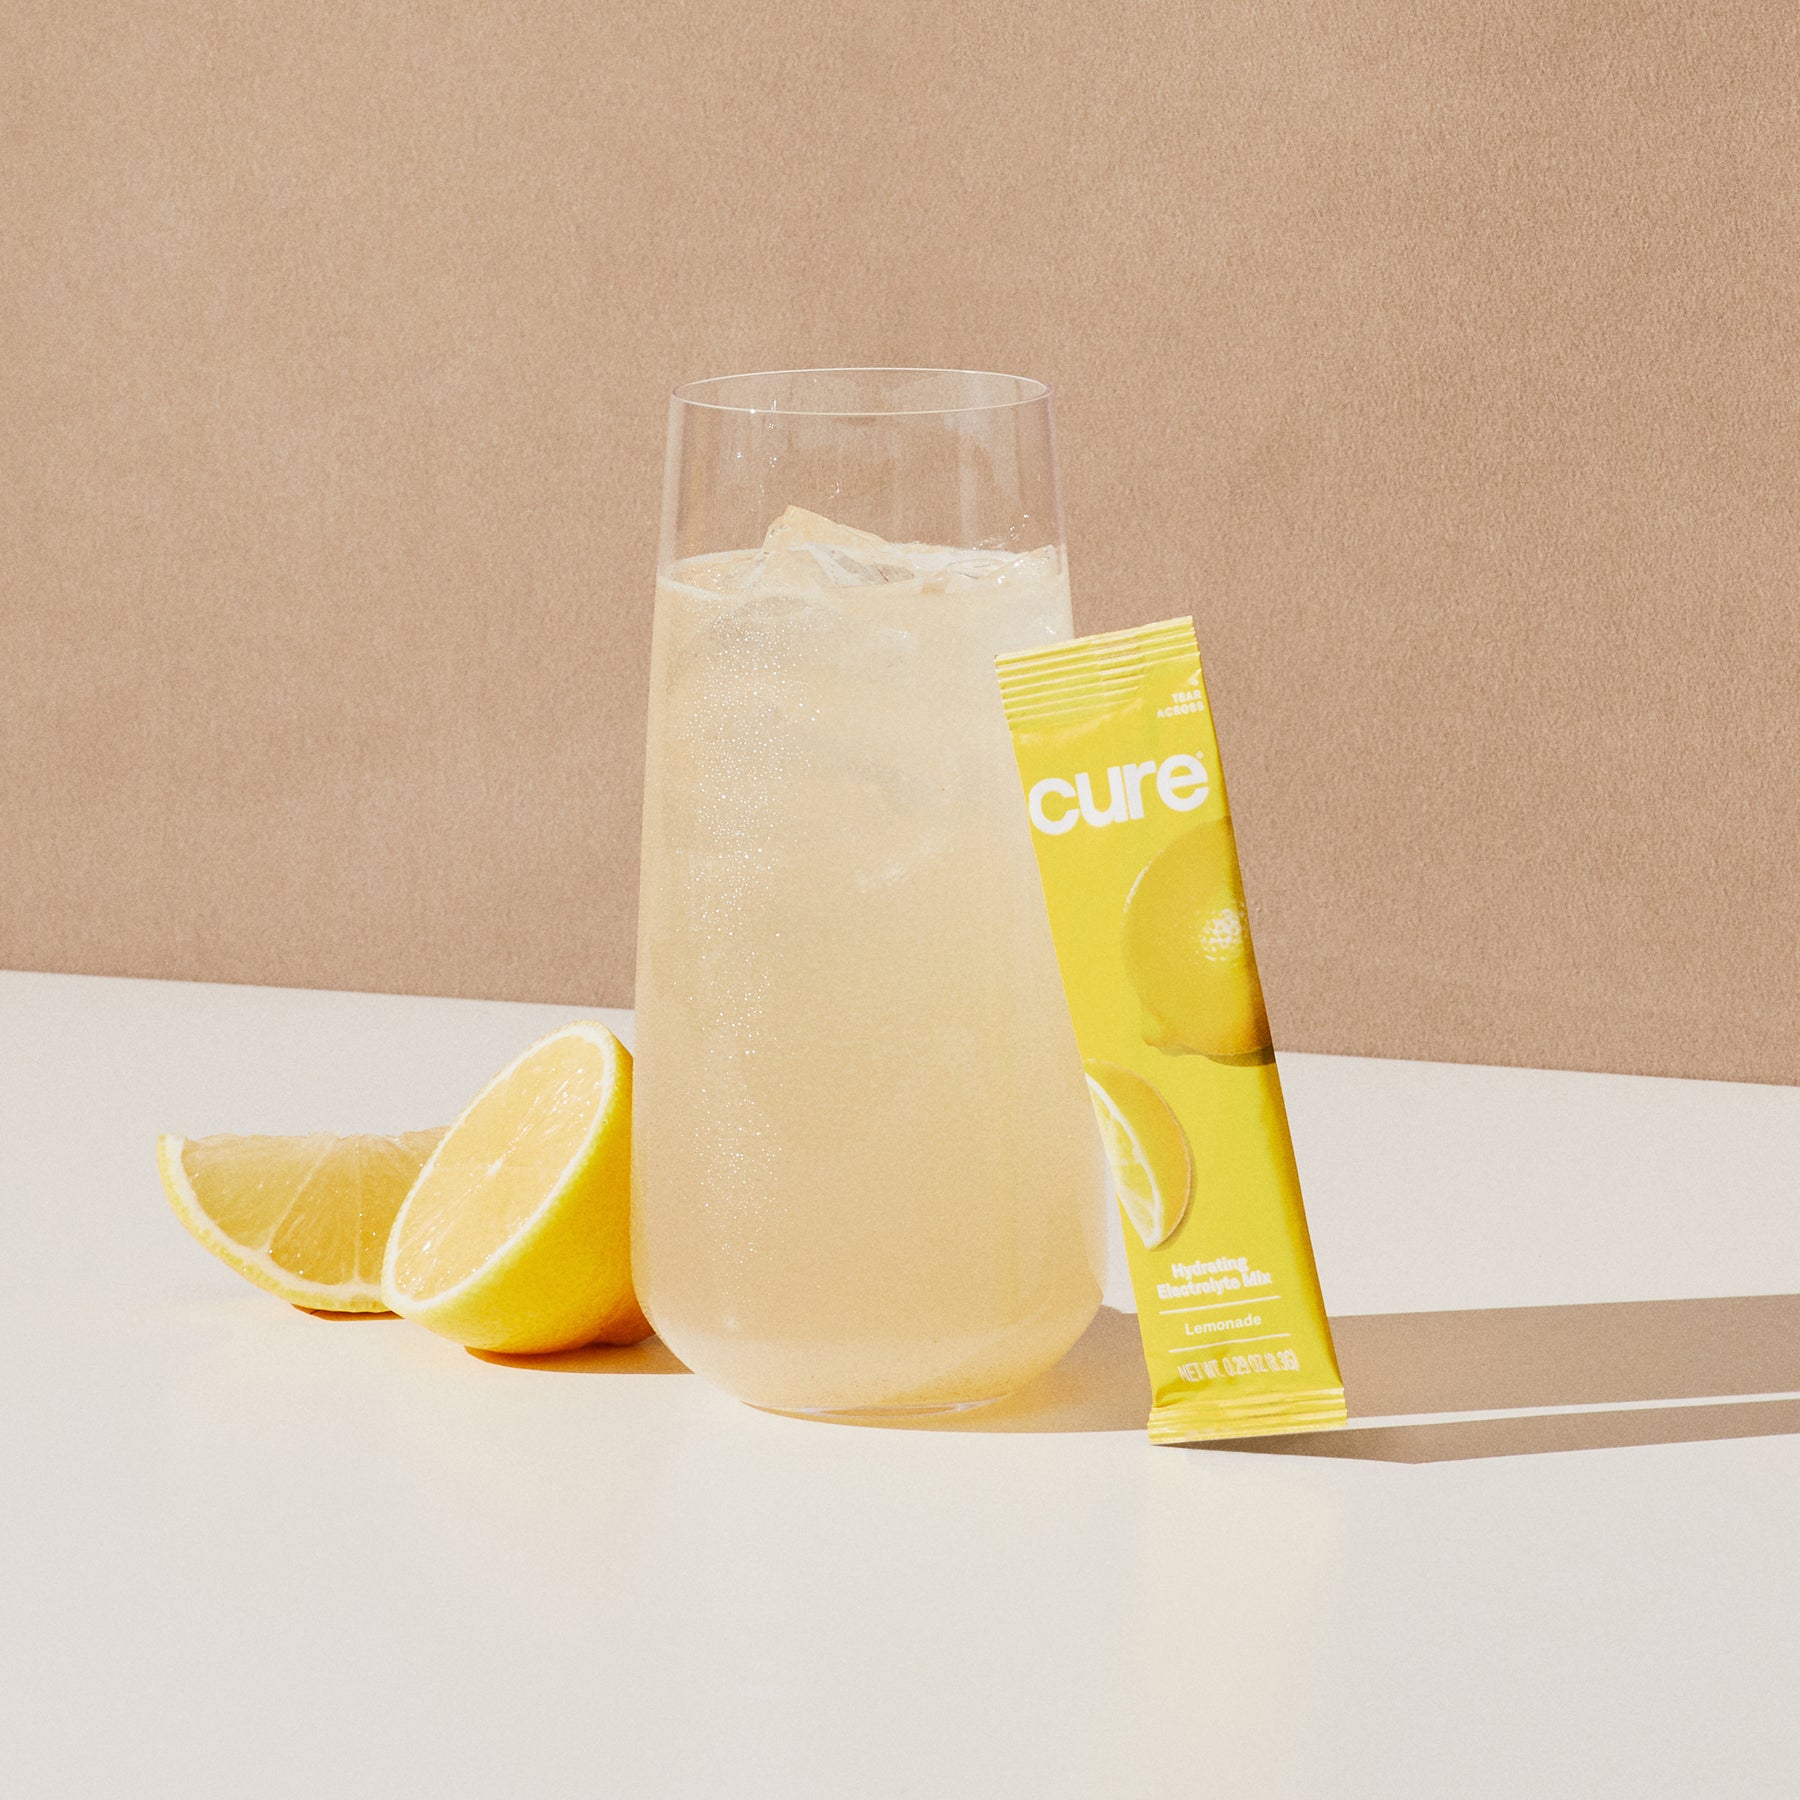 Glass of 'cure' lemonade with mix packet and lemon slices.